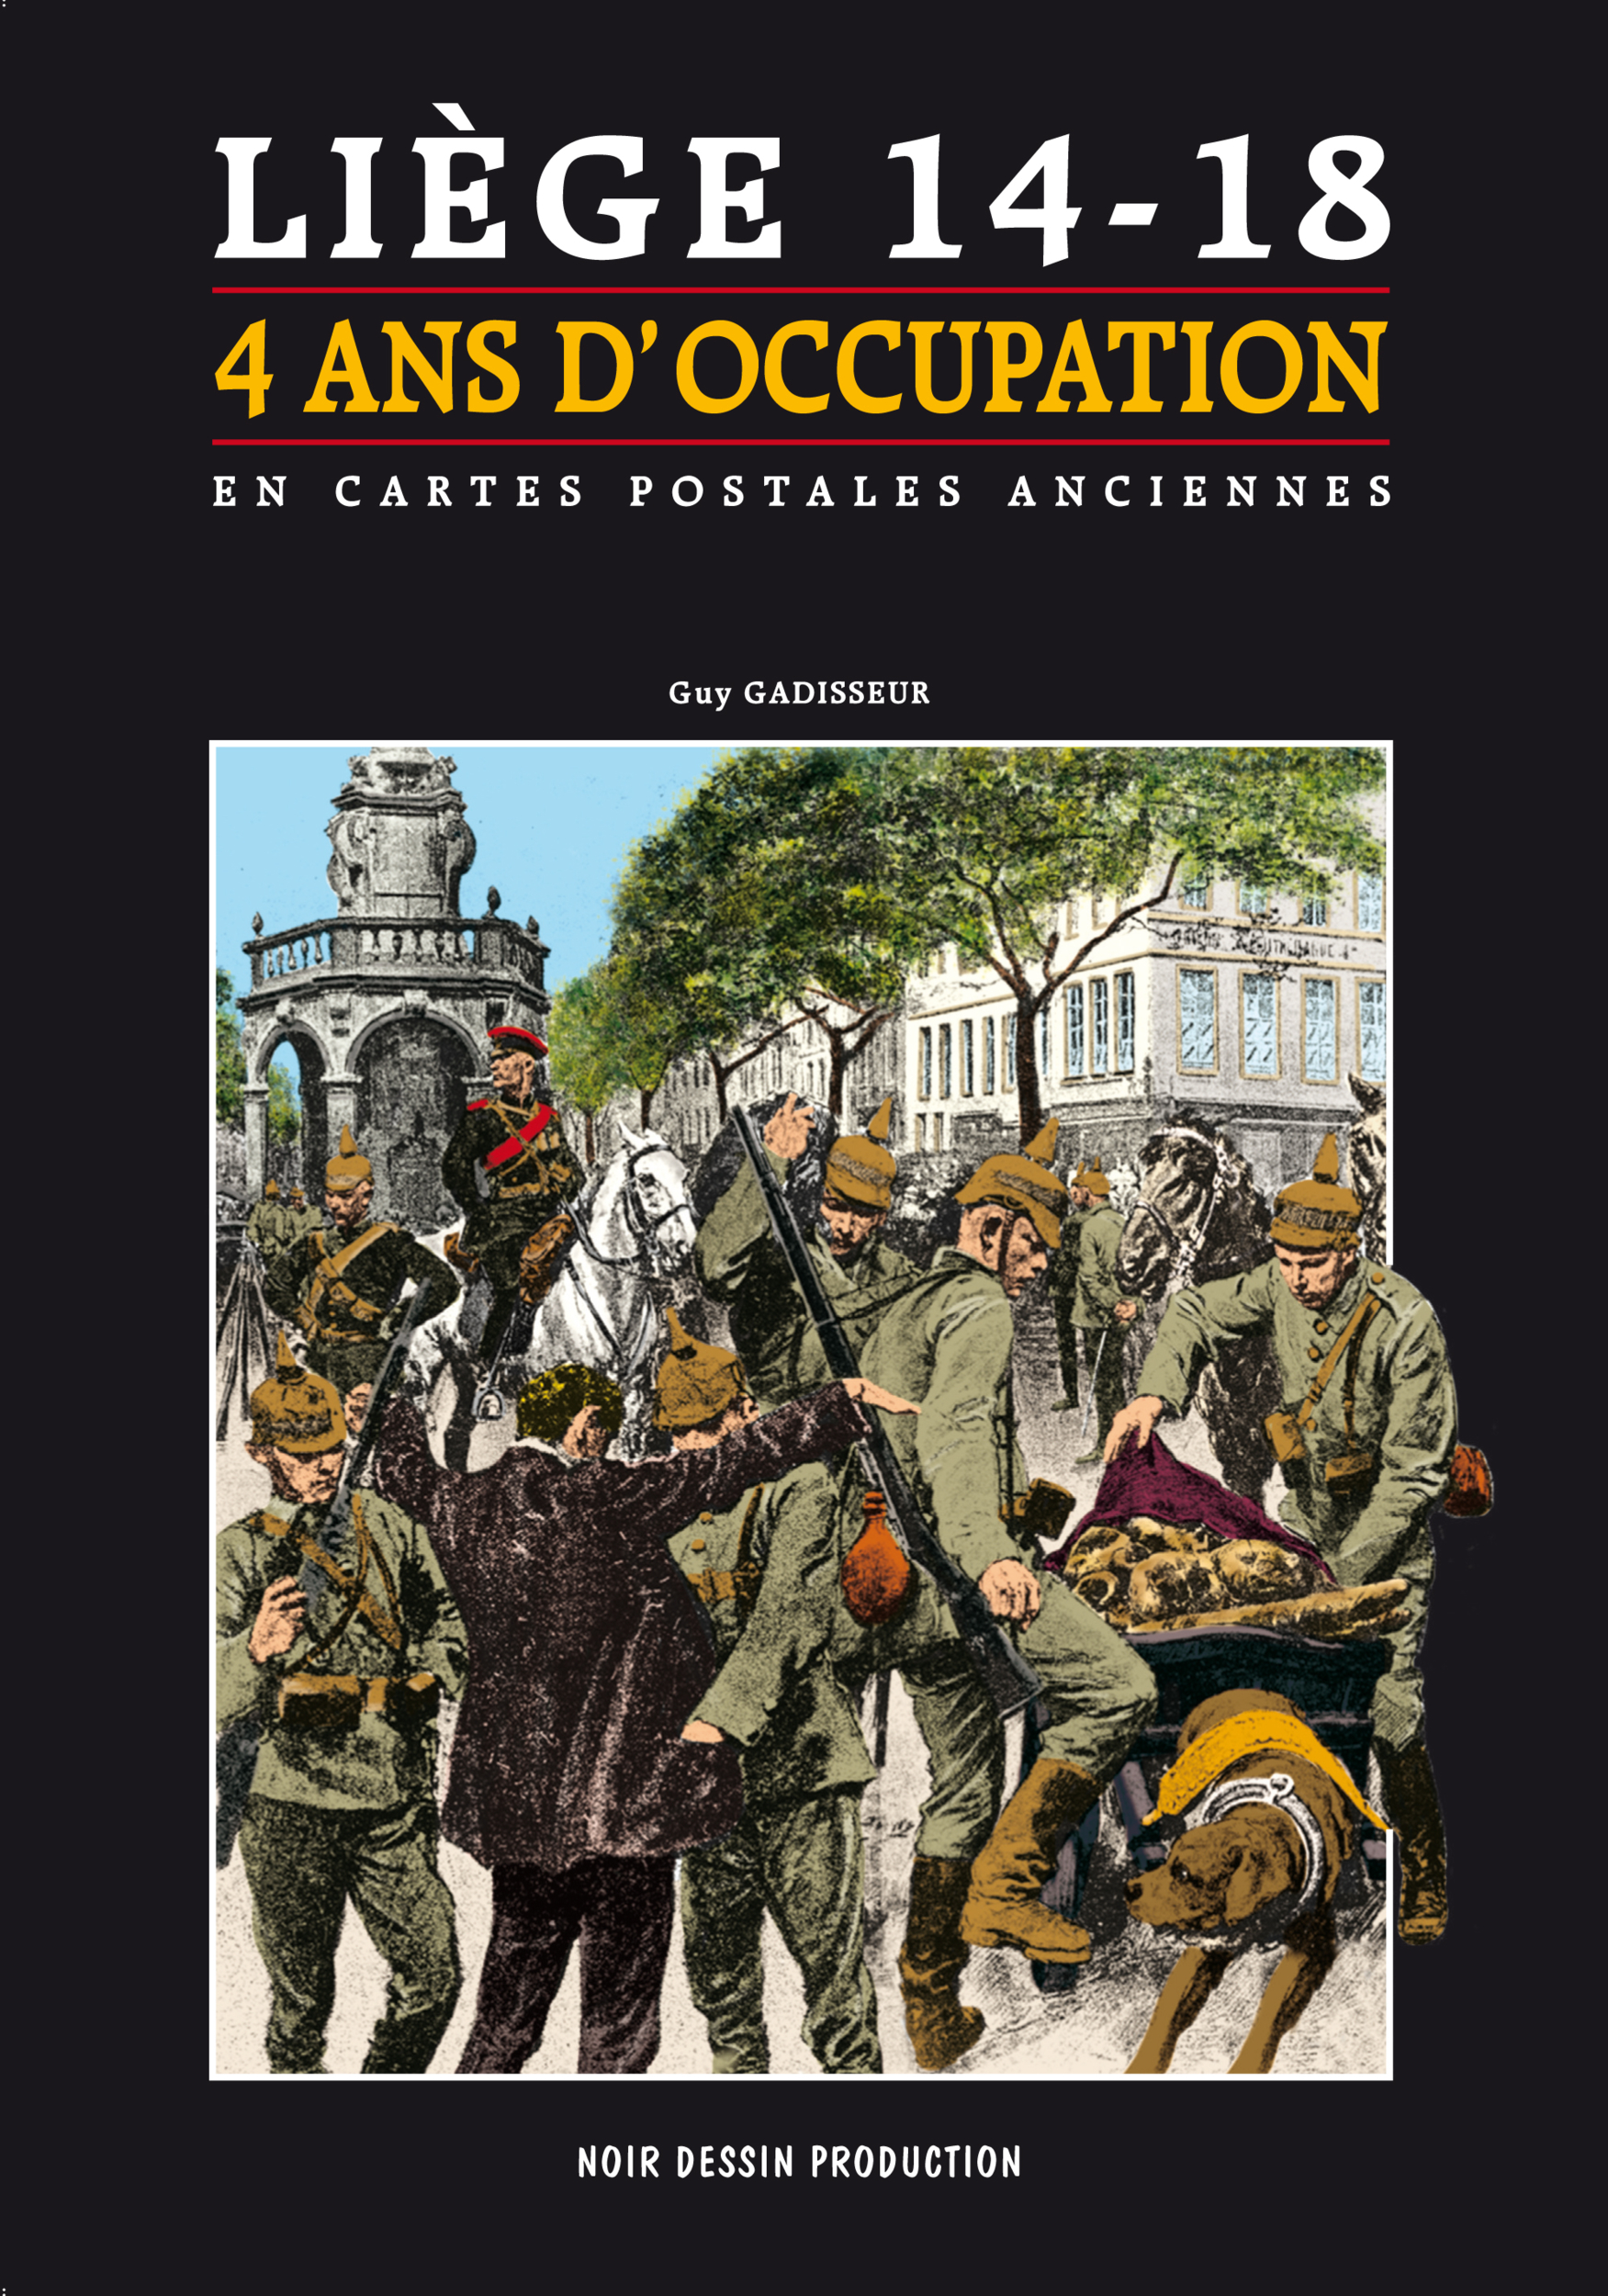 cover-4 ans d'occupation-8-04-2014